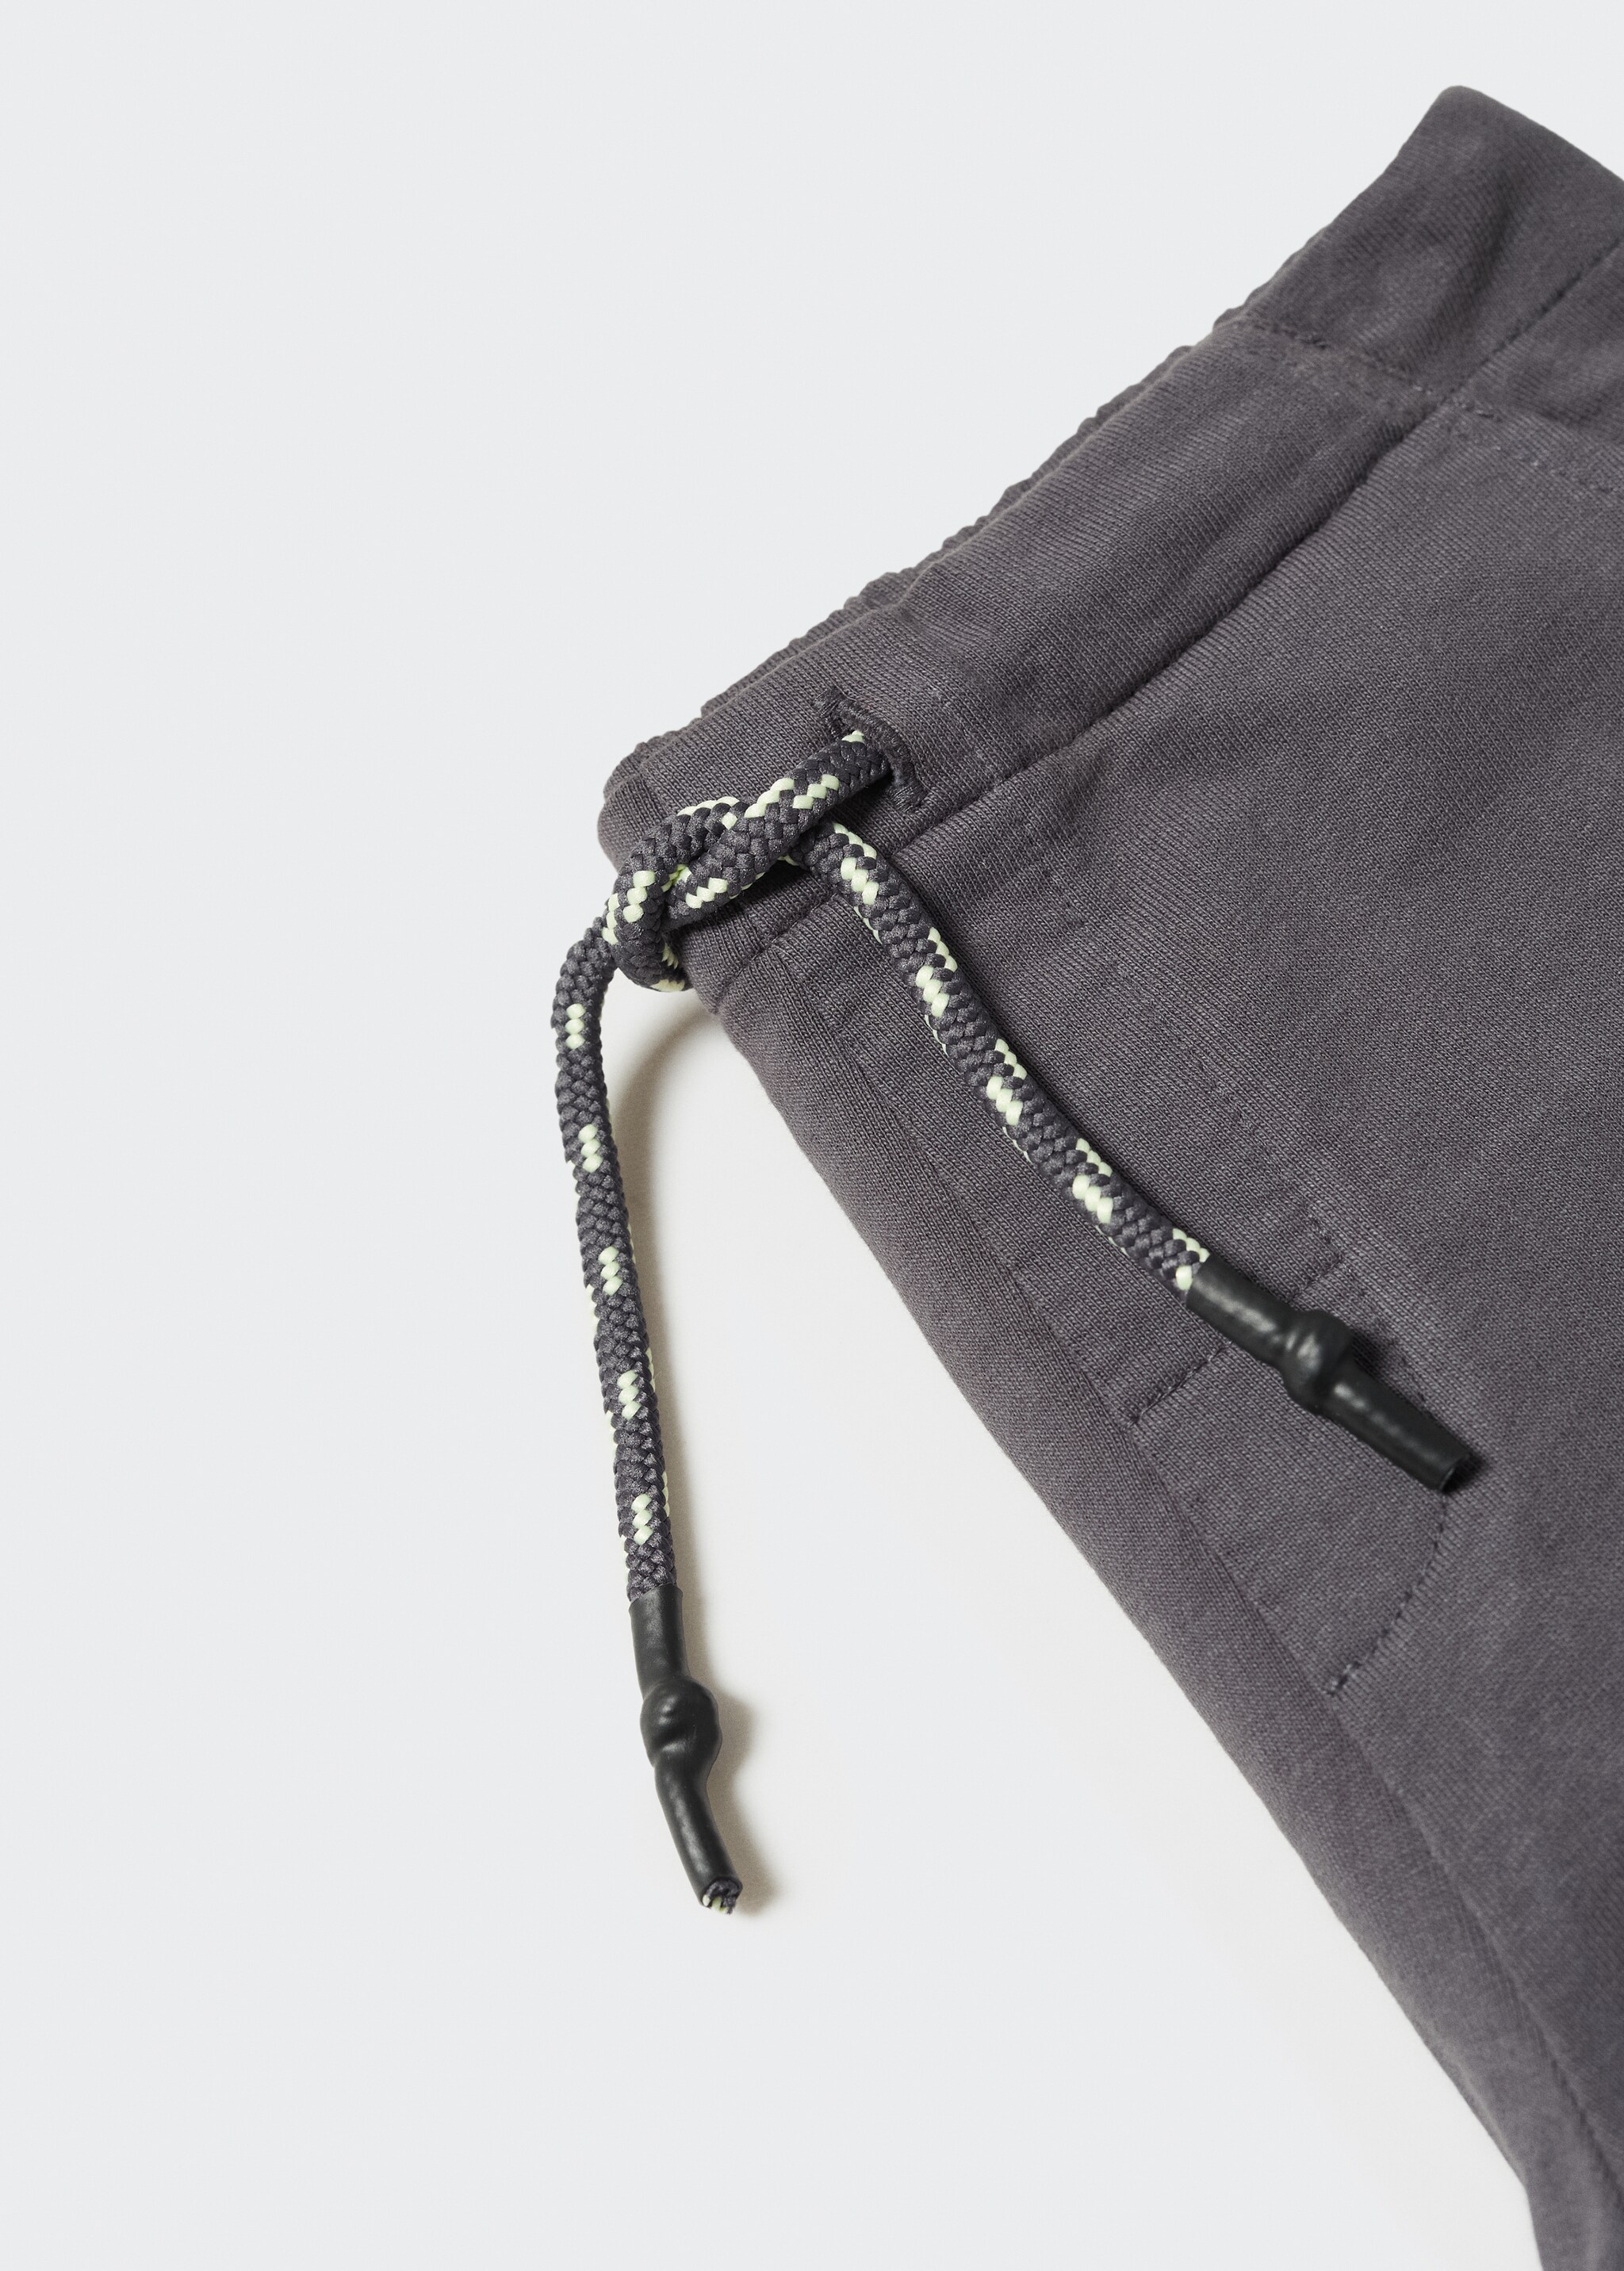 Cotton Bermuda shorts - Details of the article 8